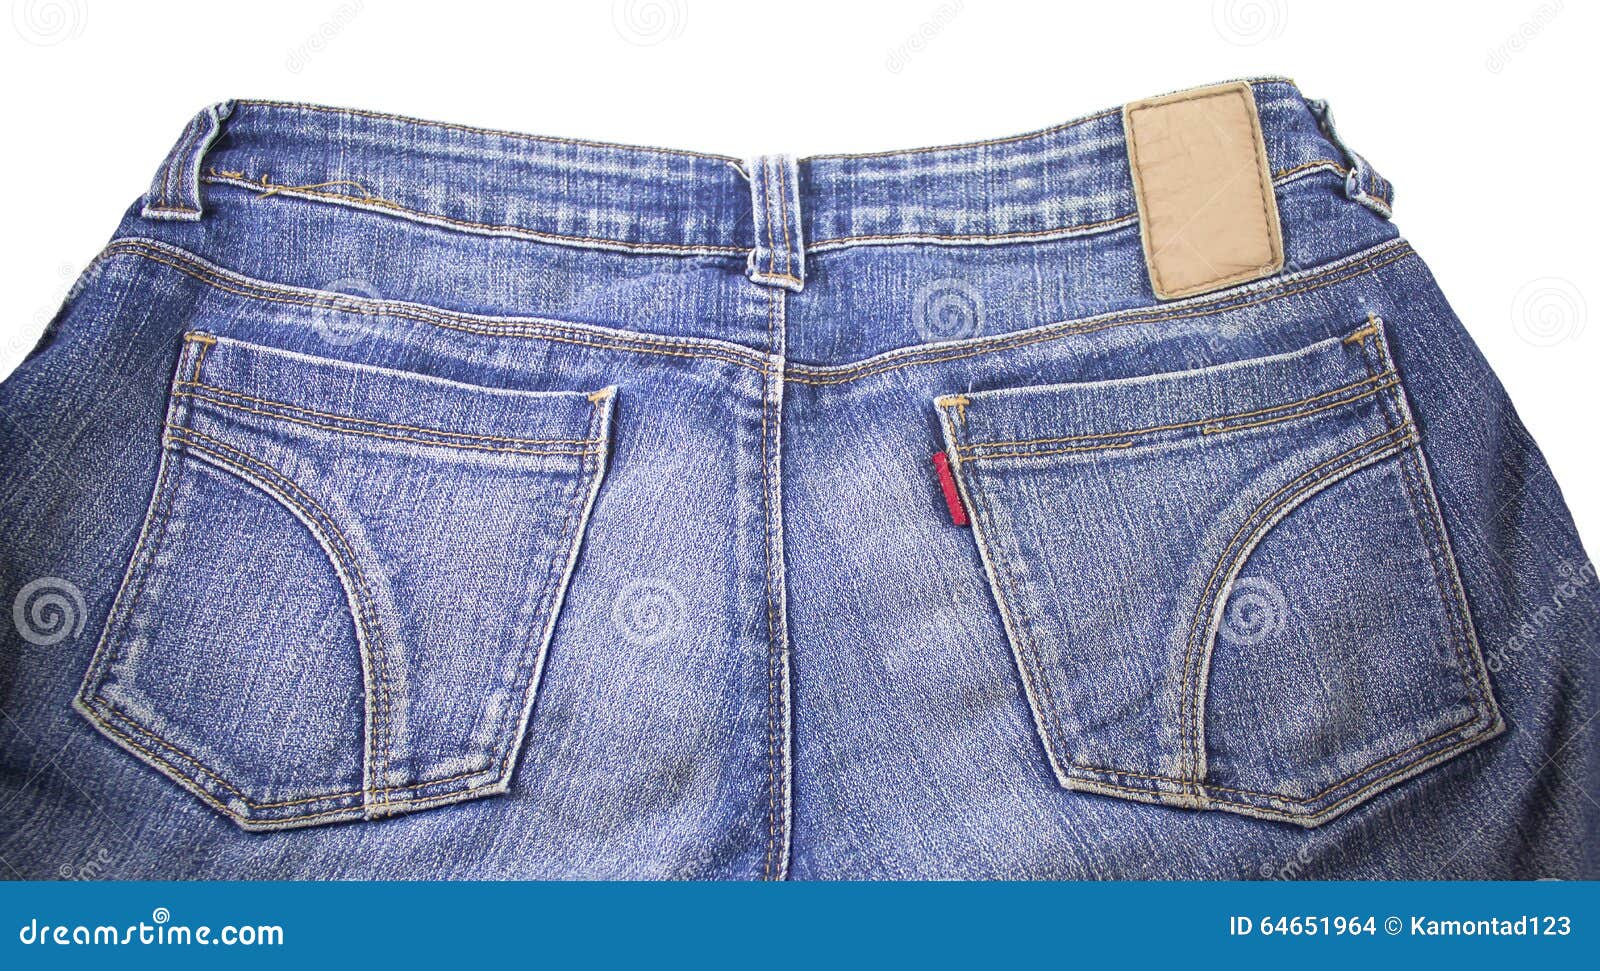 Jean stock photo. Image of casual, blue, label, cloth - 64651964